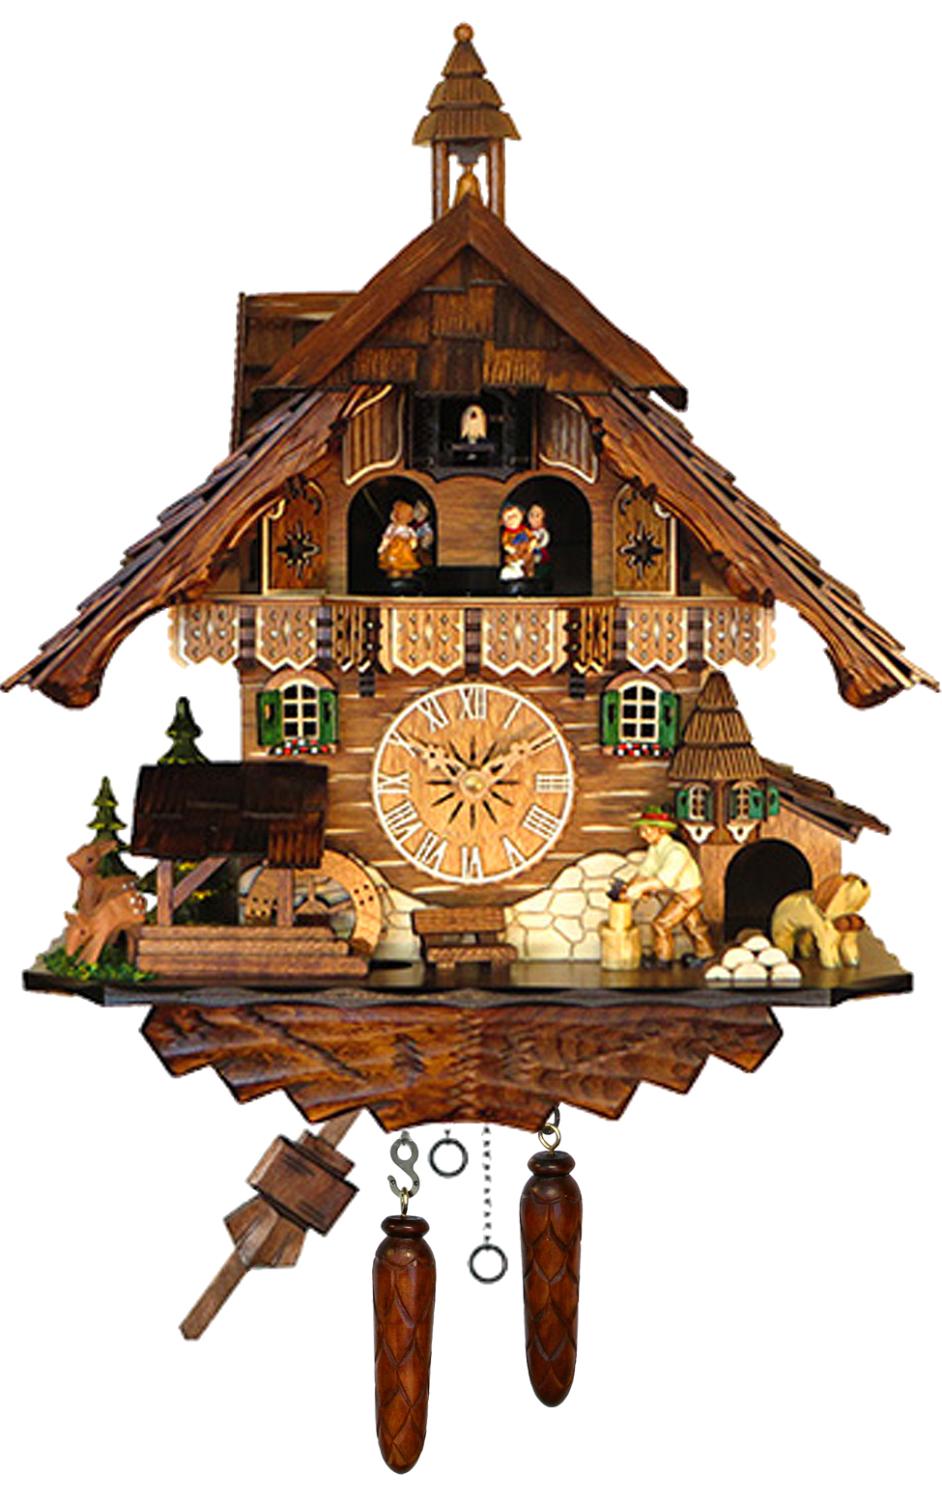 Engstler Battery-operated Cuckoo Clock - Full Size                                                                                                                                                      